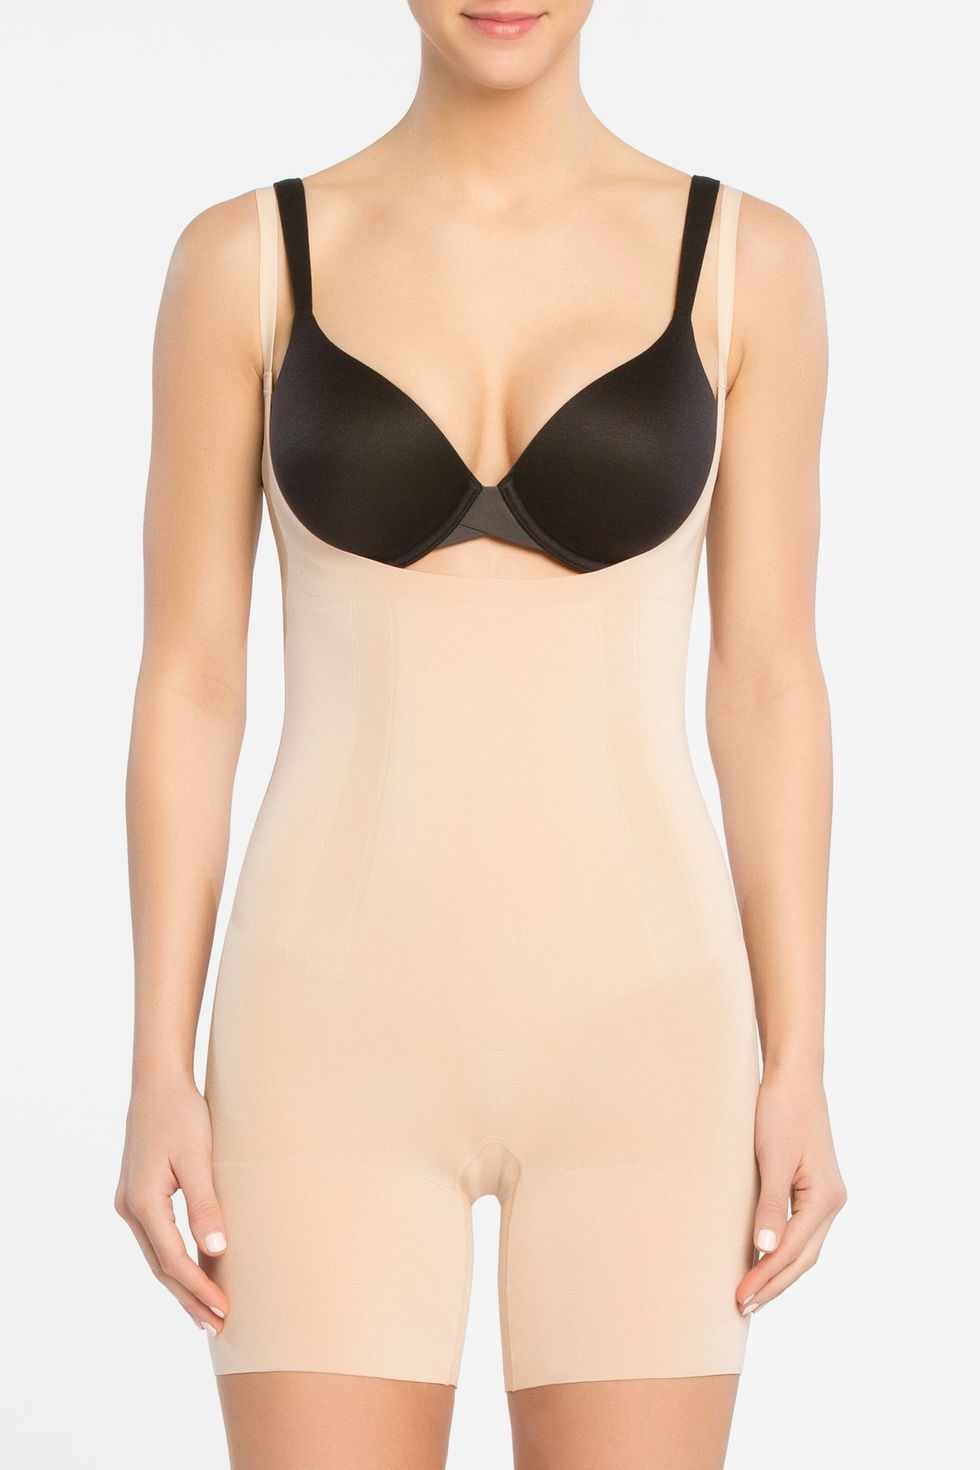 New Feature! Elle Names Our Shapewear As A Top 18 Most Flattering